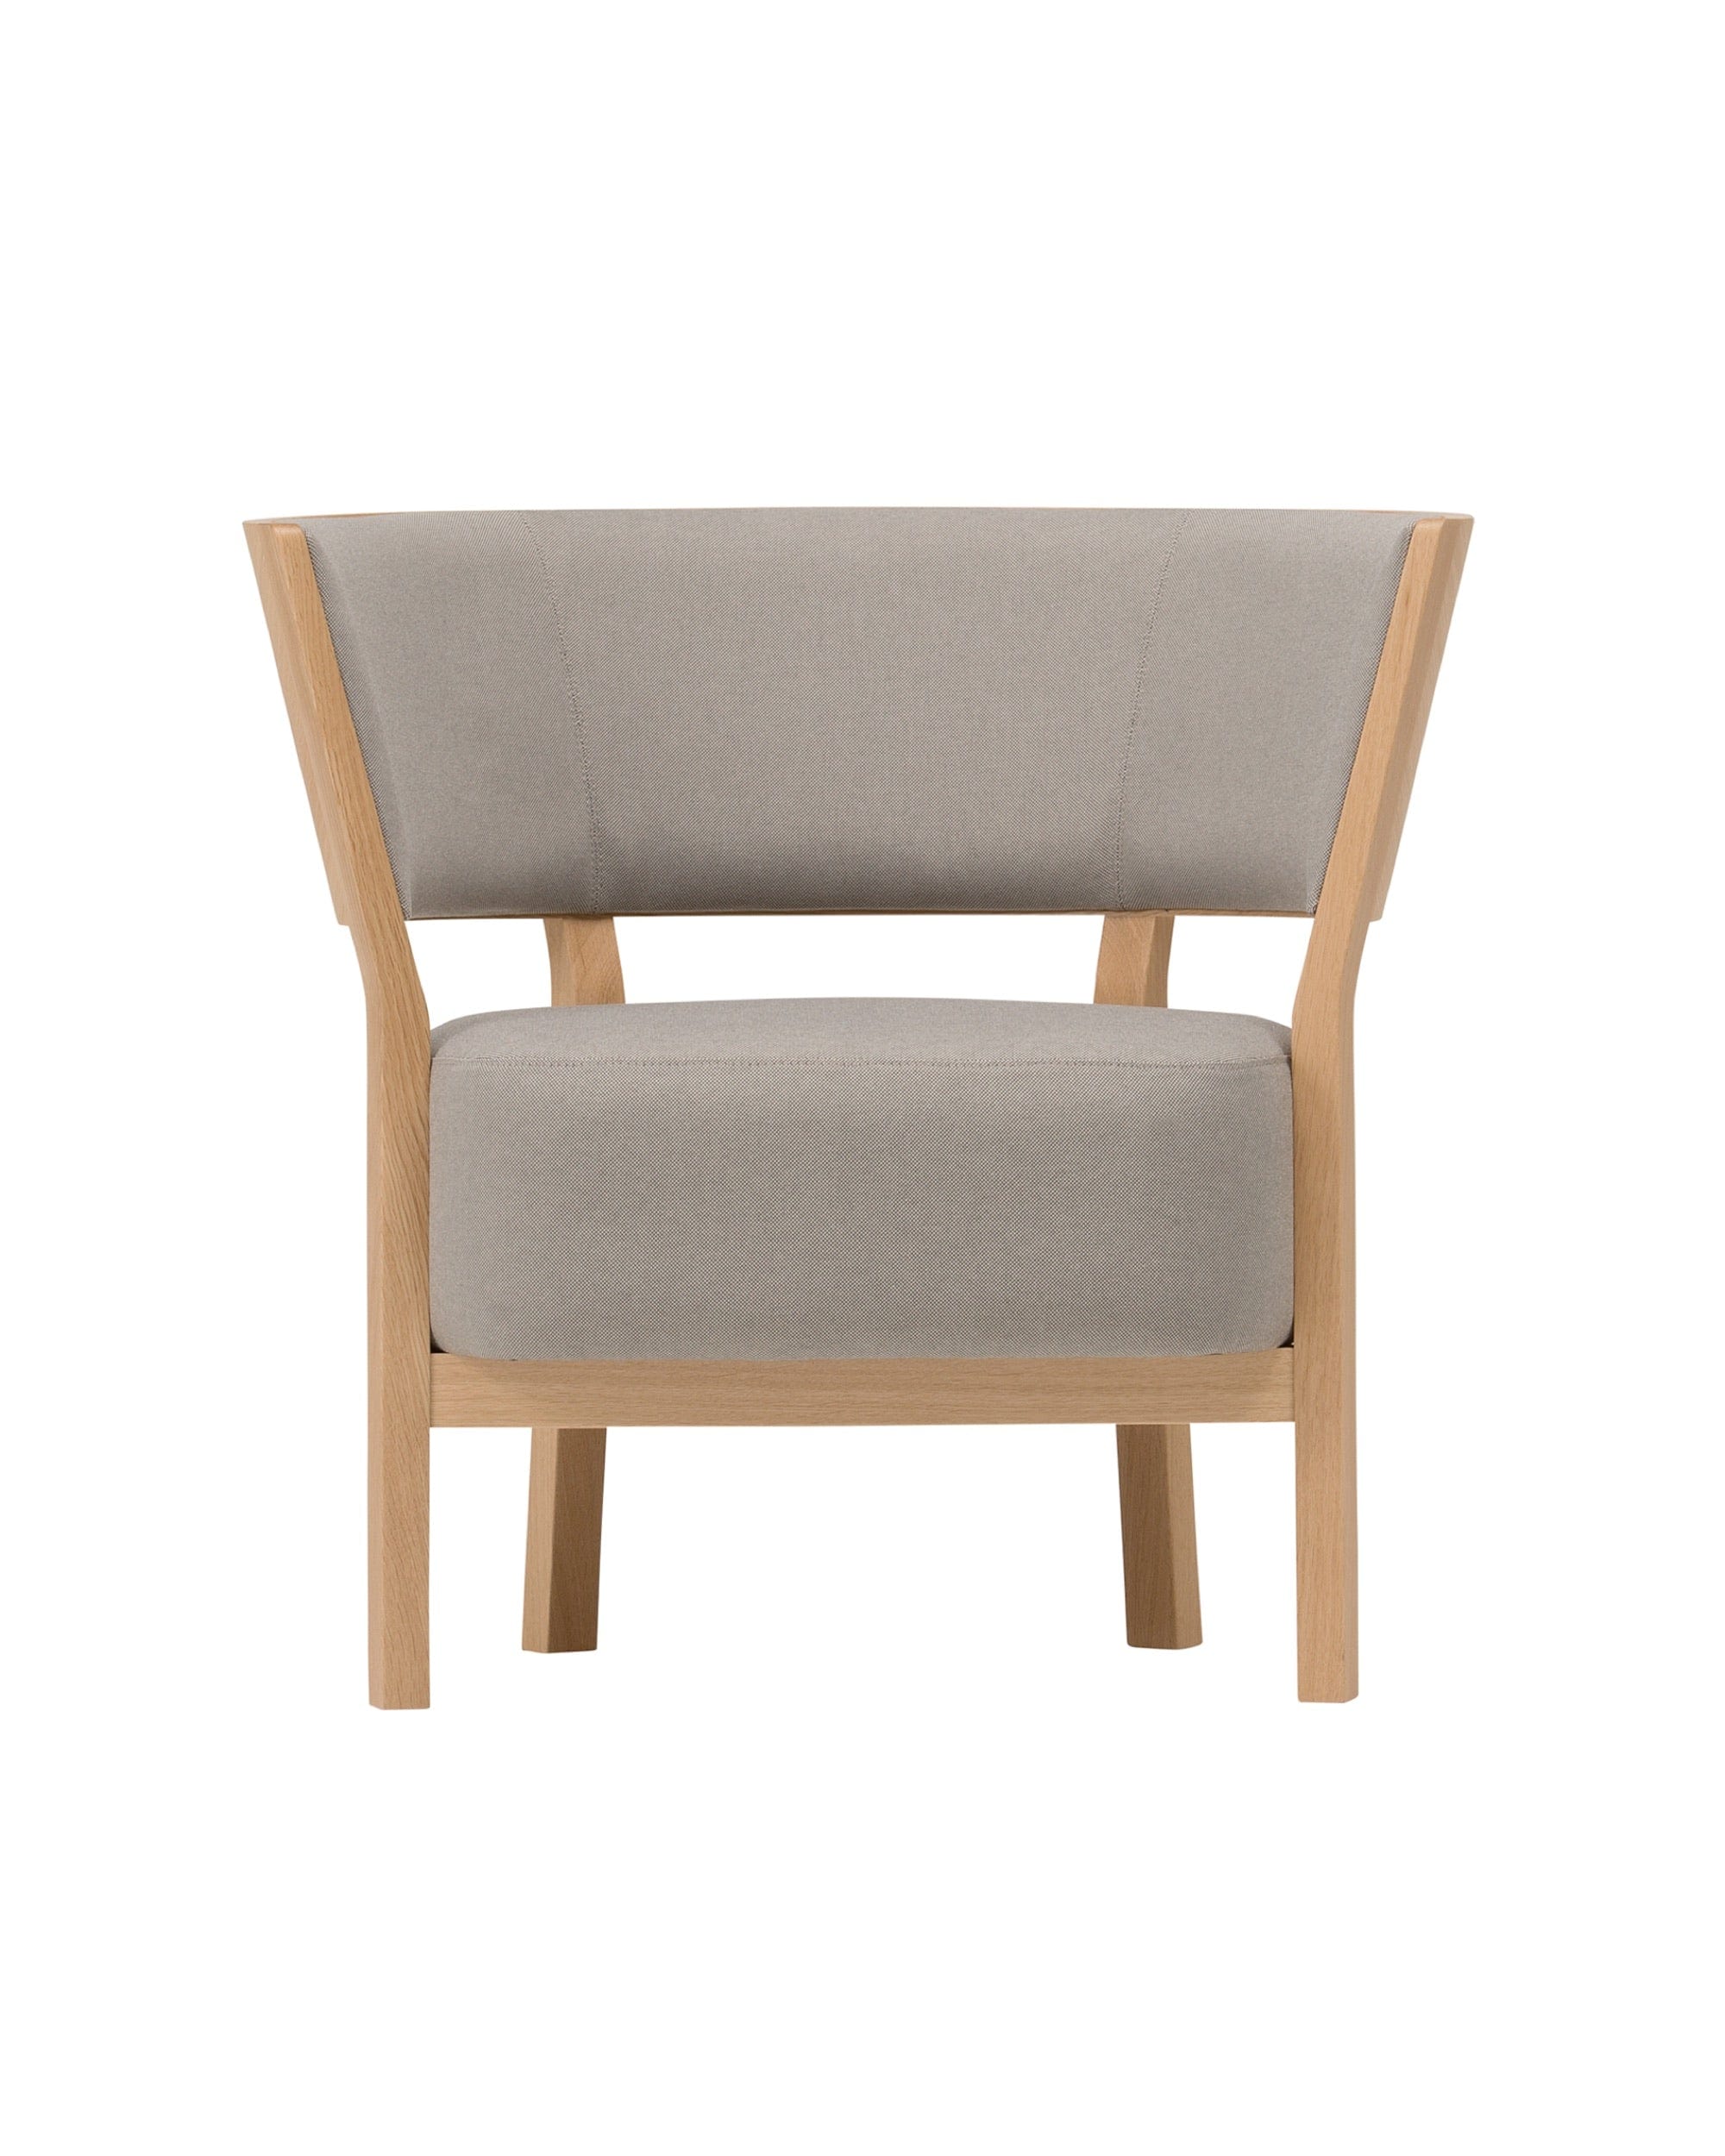 TOSAI Lounge Chair, Japanese Oak Natural